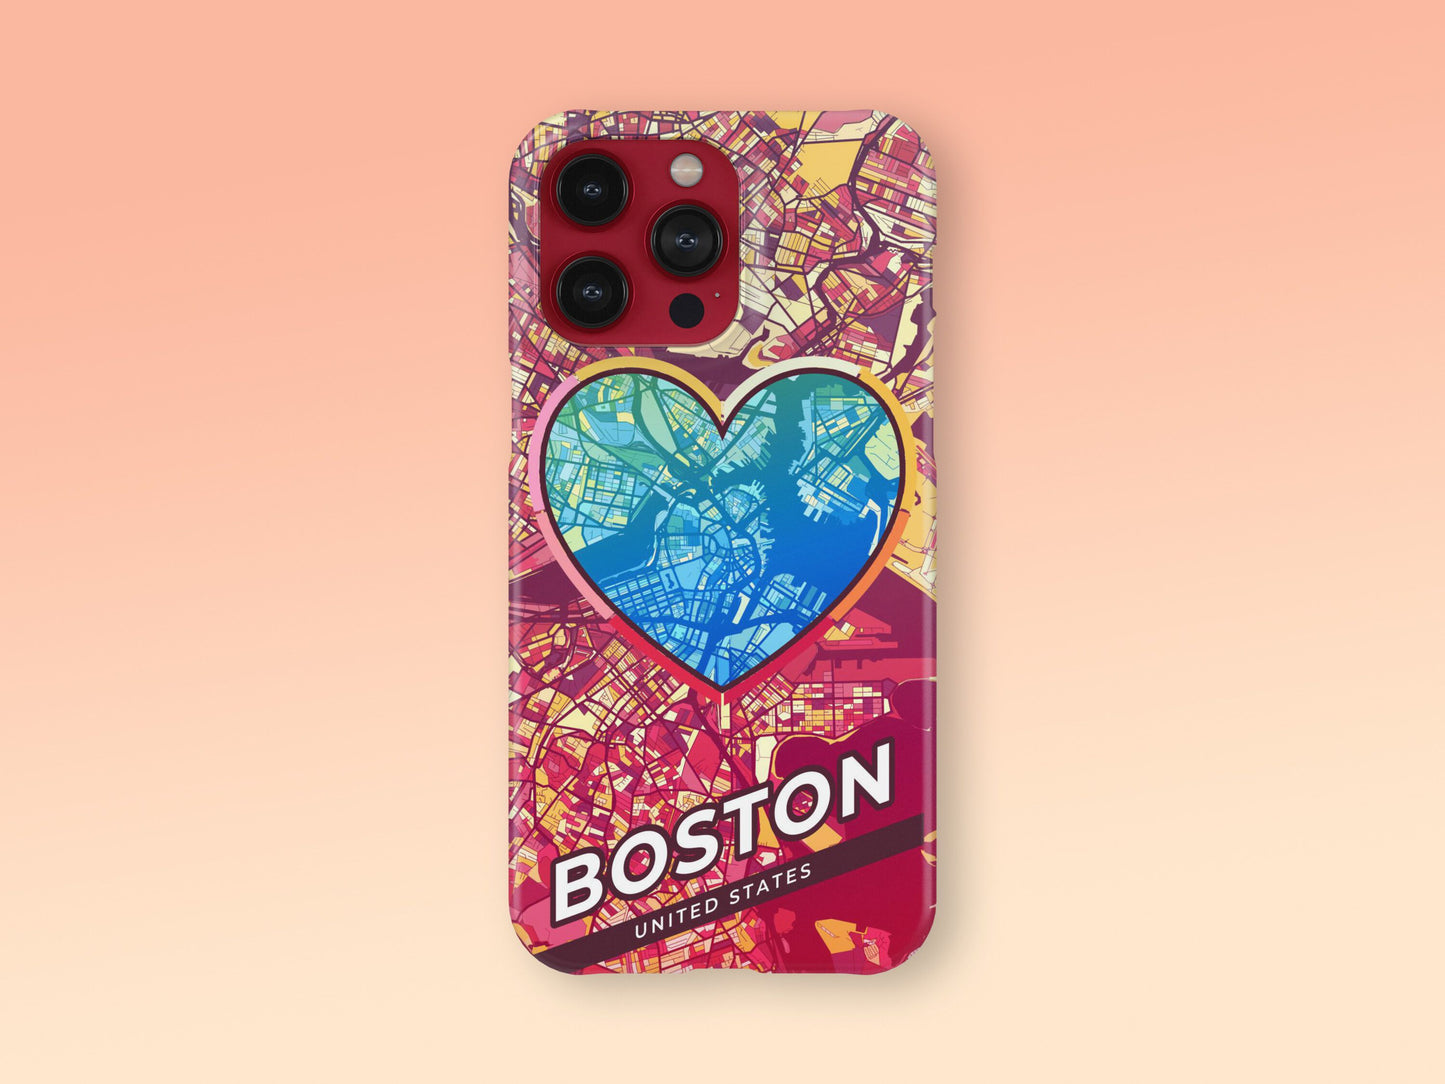 Boston Massachusetts slim phone case with colorful icon. Birthday, wedding or housewarming gift. Couple match cases. 2